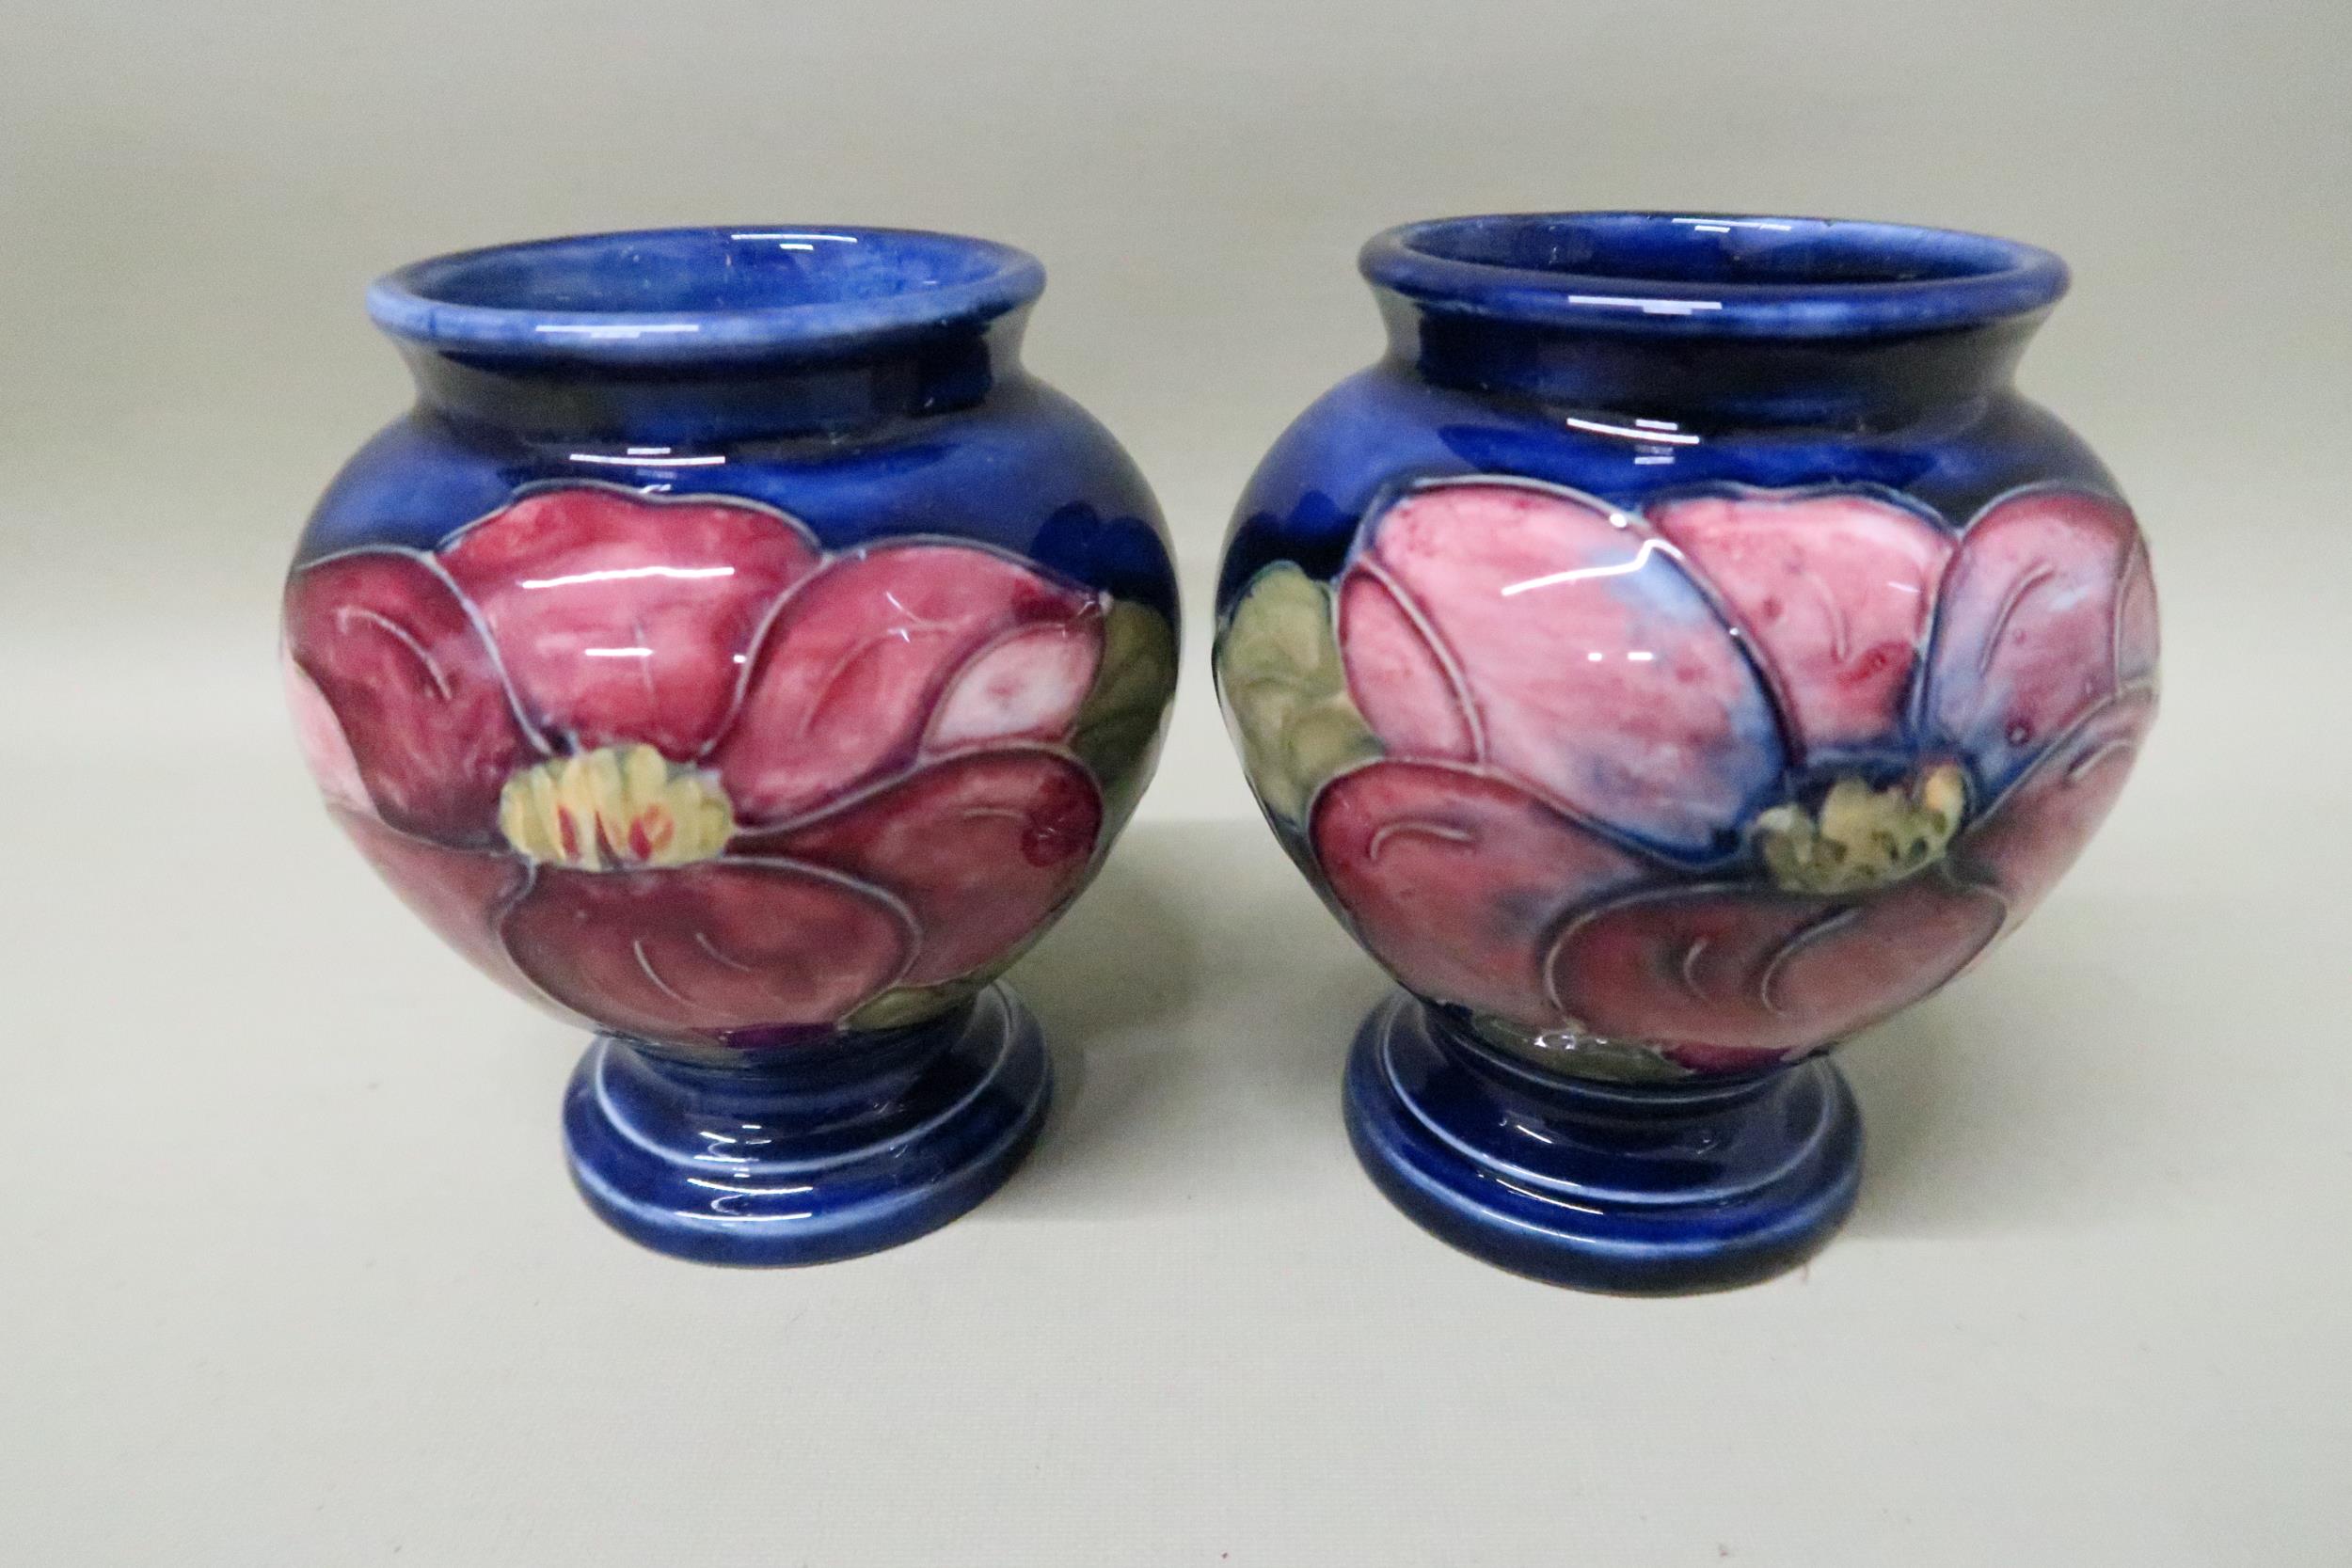 Moorcroft Pottery - Two items, blue background - approx Height 9cm x Diameter 8cm